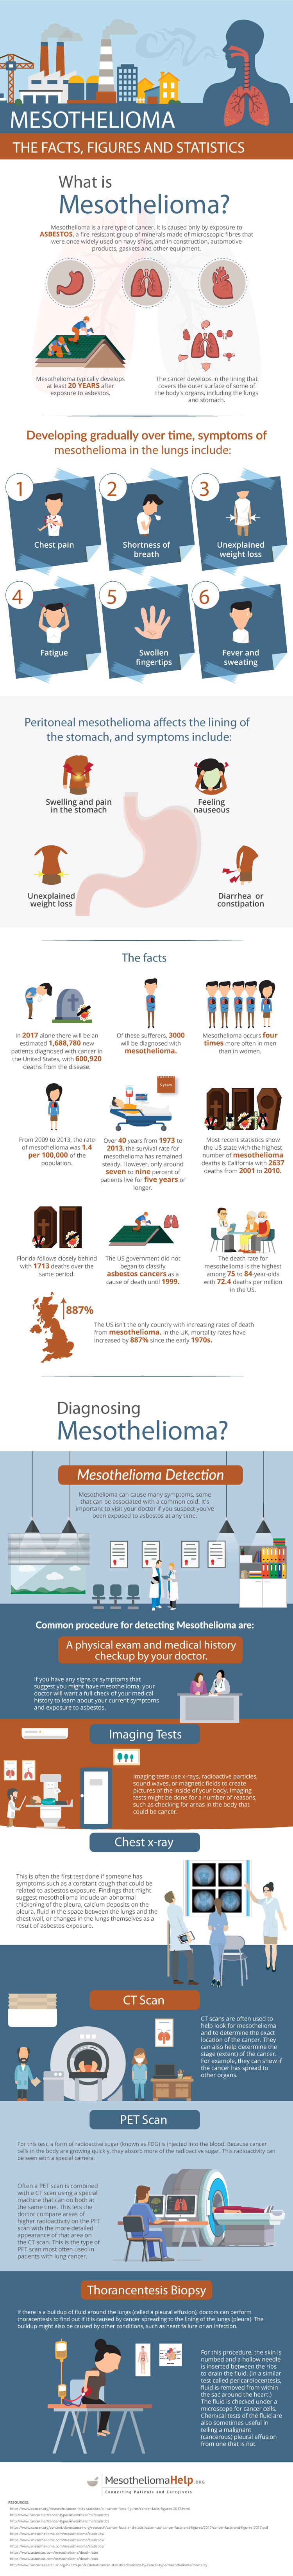 What is Mesothelioma? The Facts, Figures, and Statistics